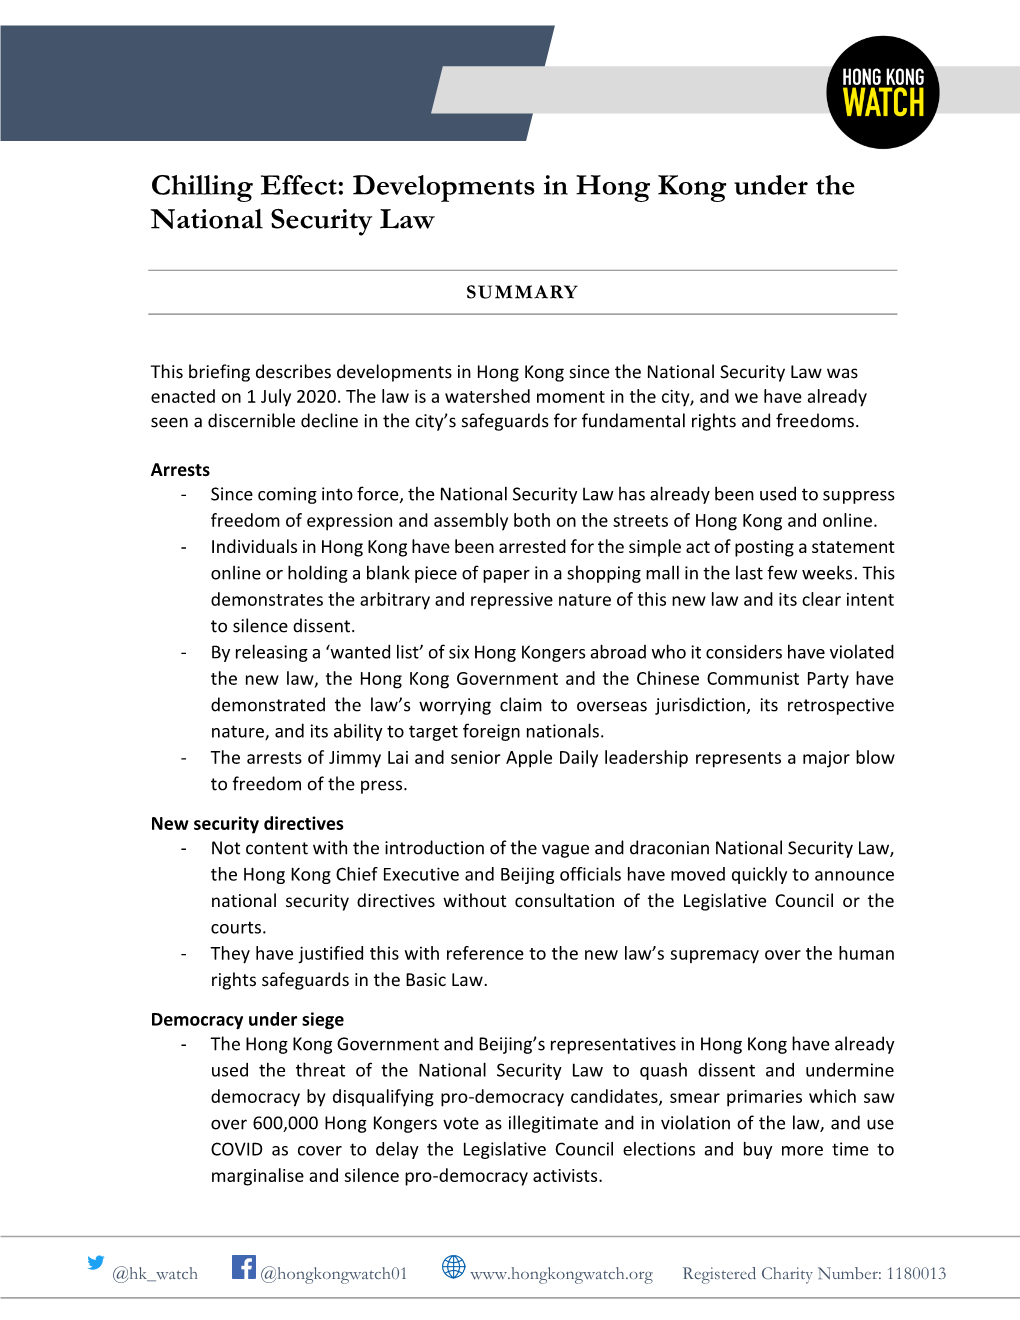 Chilling Effect: Developments in Hong Kong Under the National Security Law